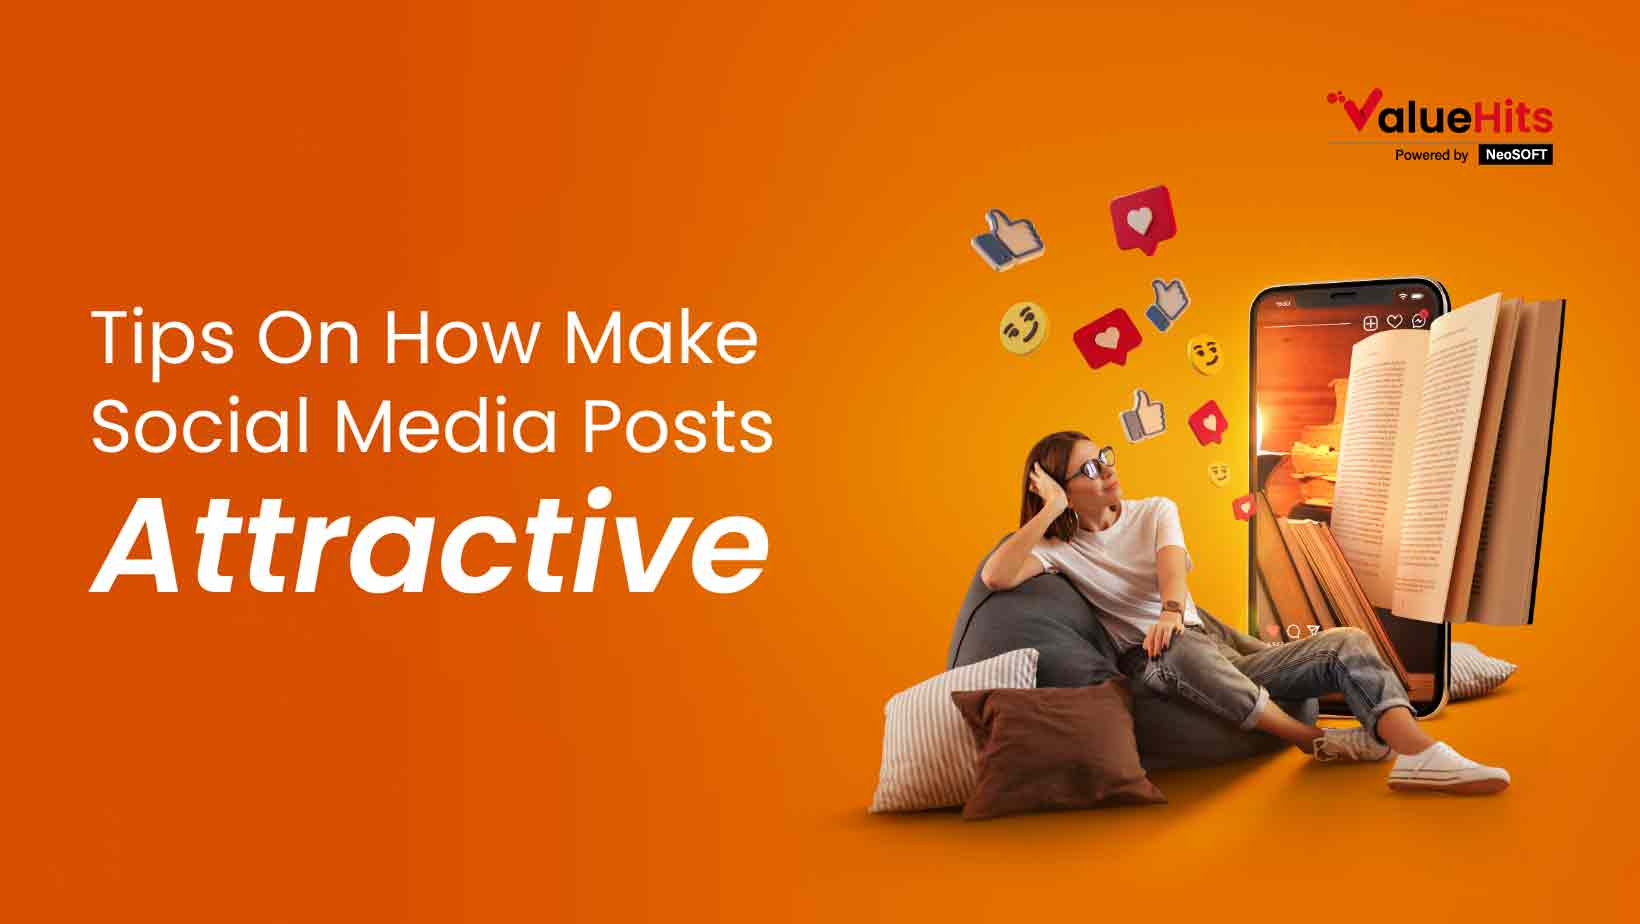 Tips On How Make Social Media Posts Attractive